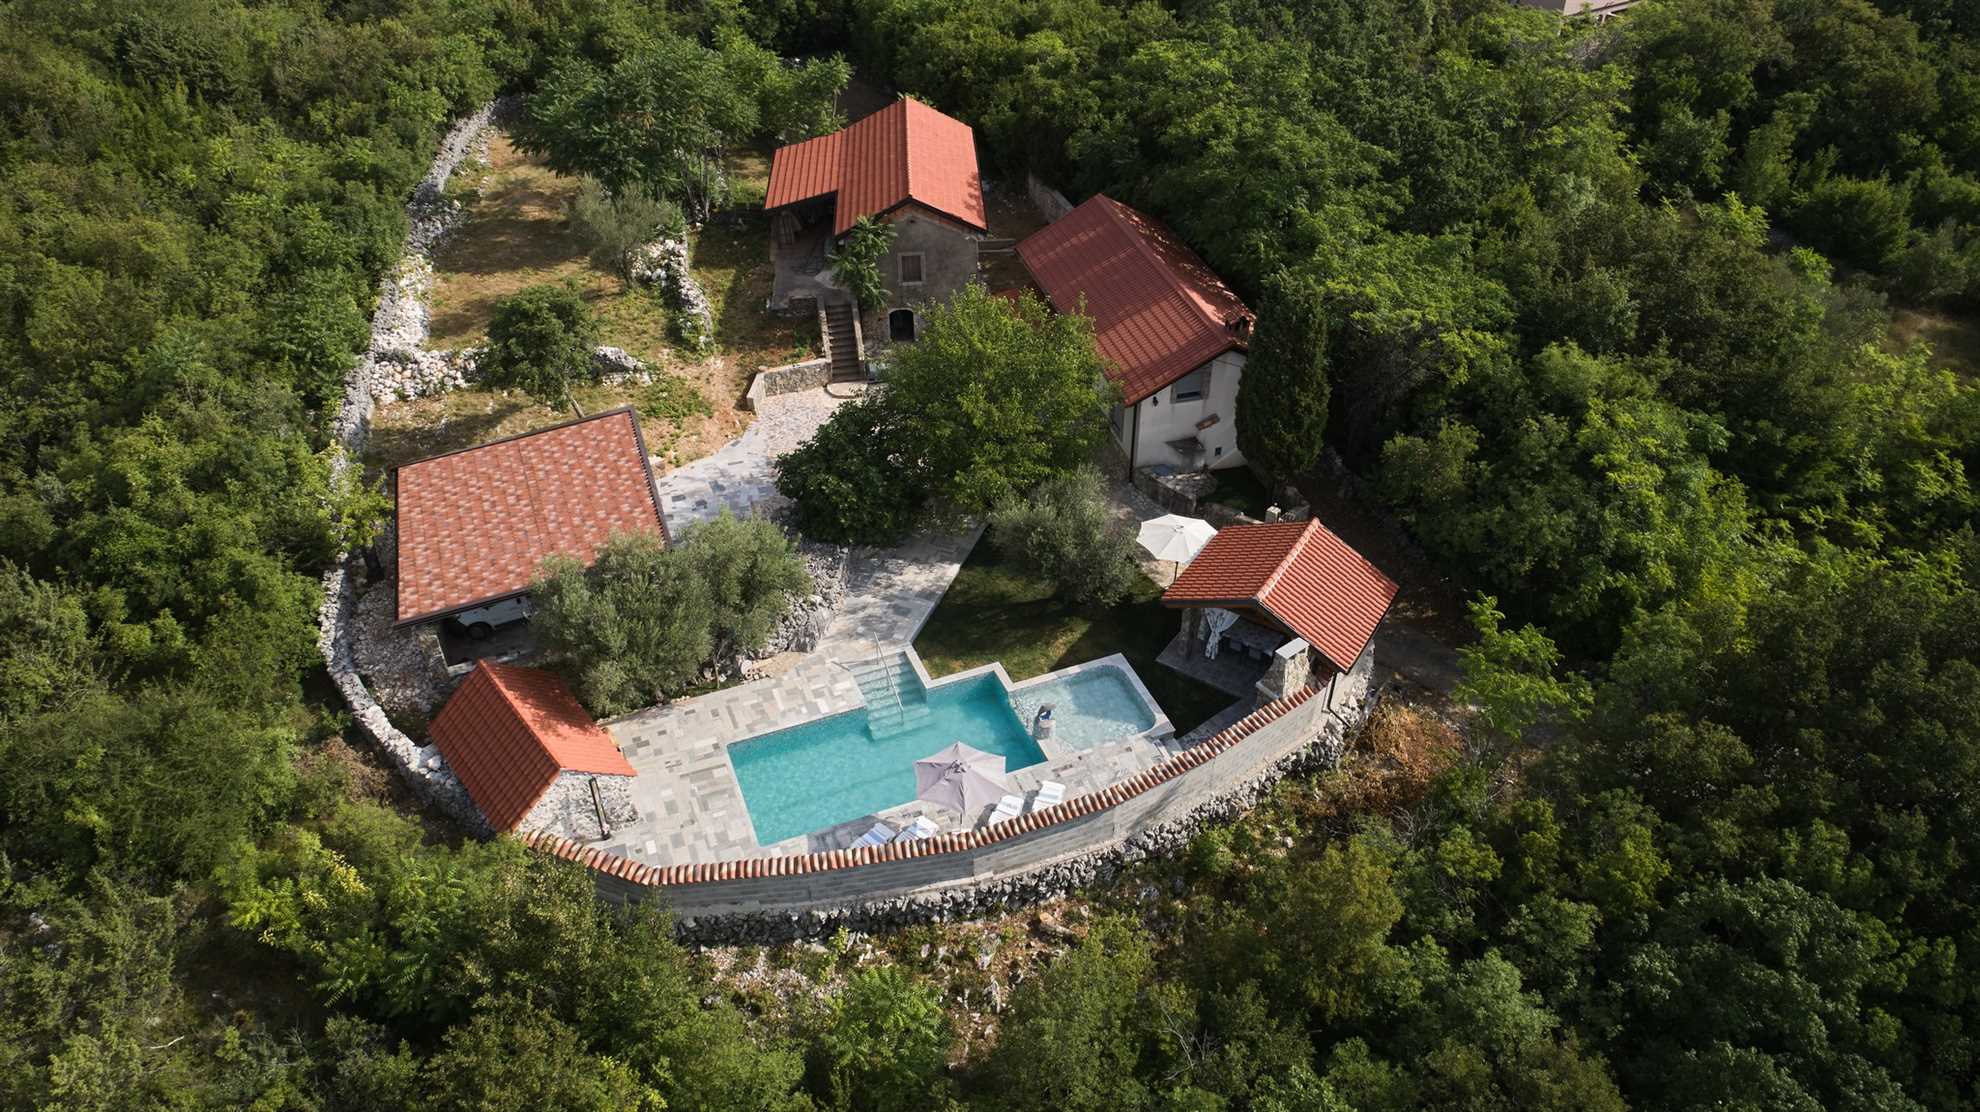 Charming Villa Neval with private swimming pool - Why choose us?